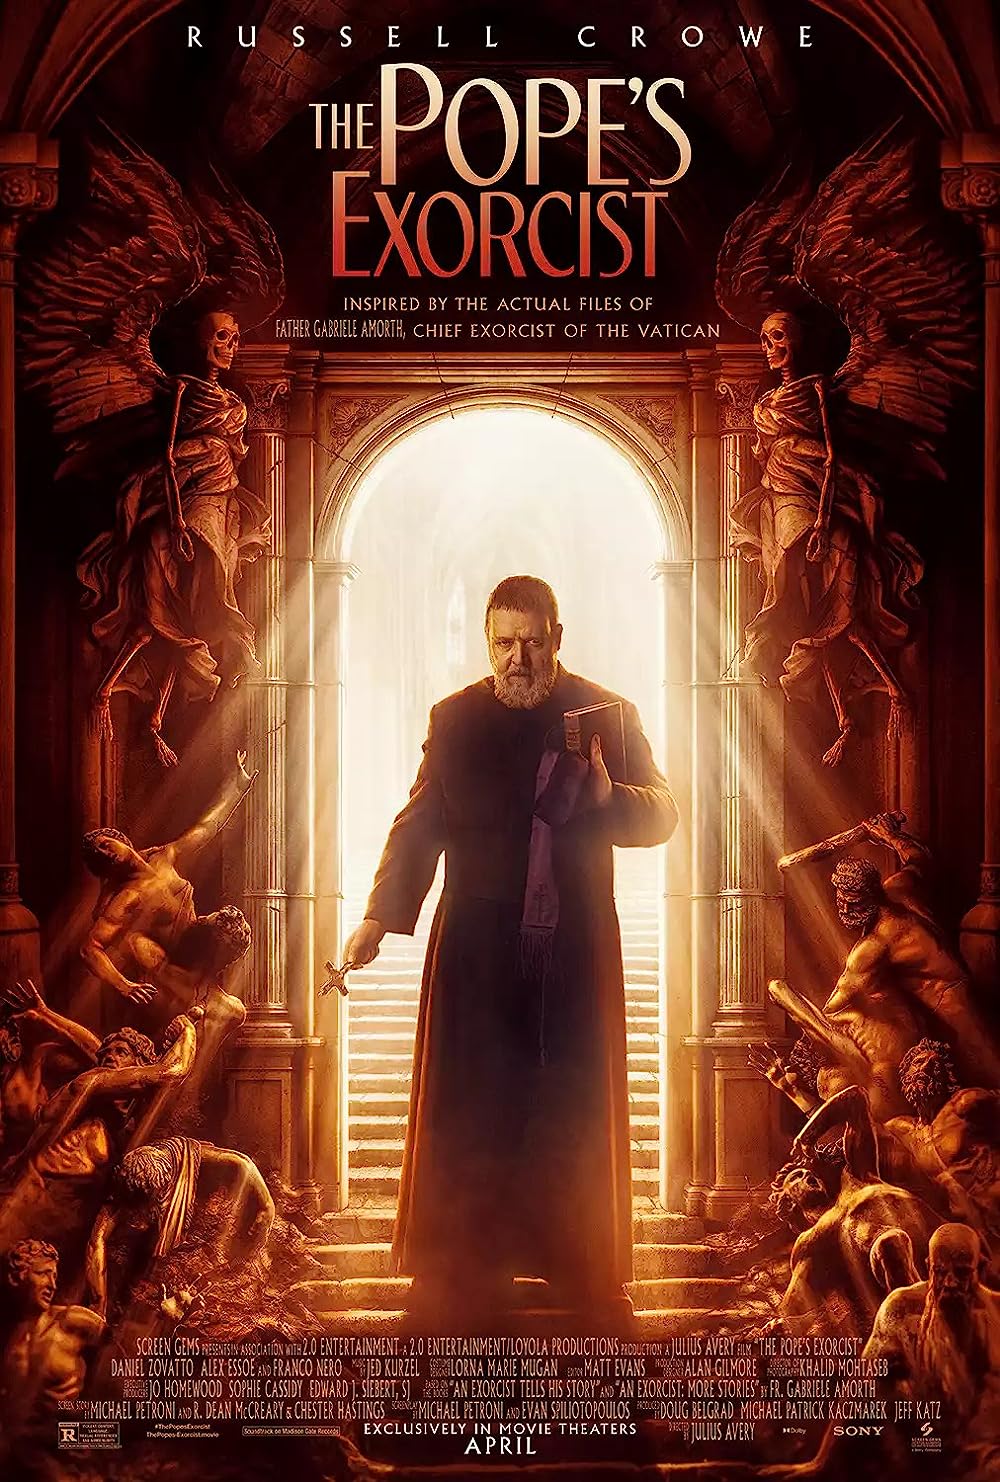 Cover Art for "The Pope's Exorcist"